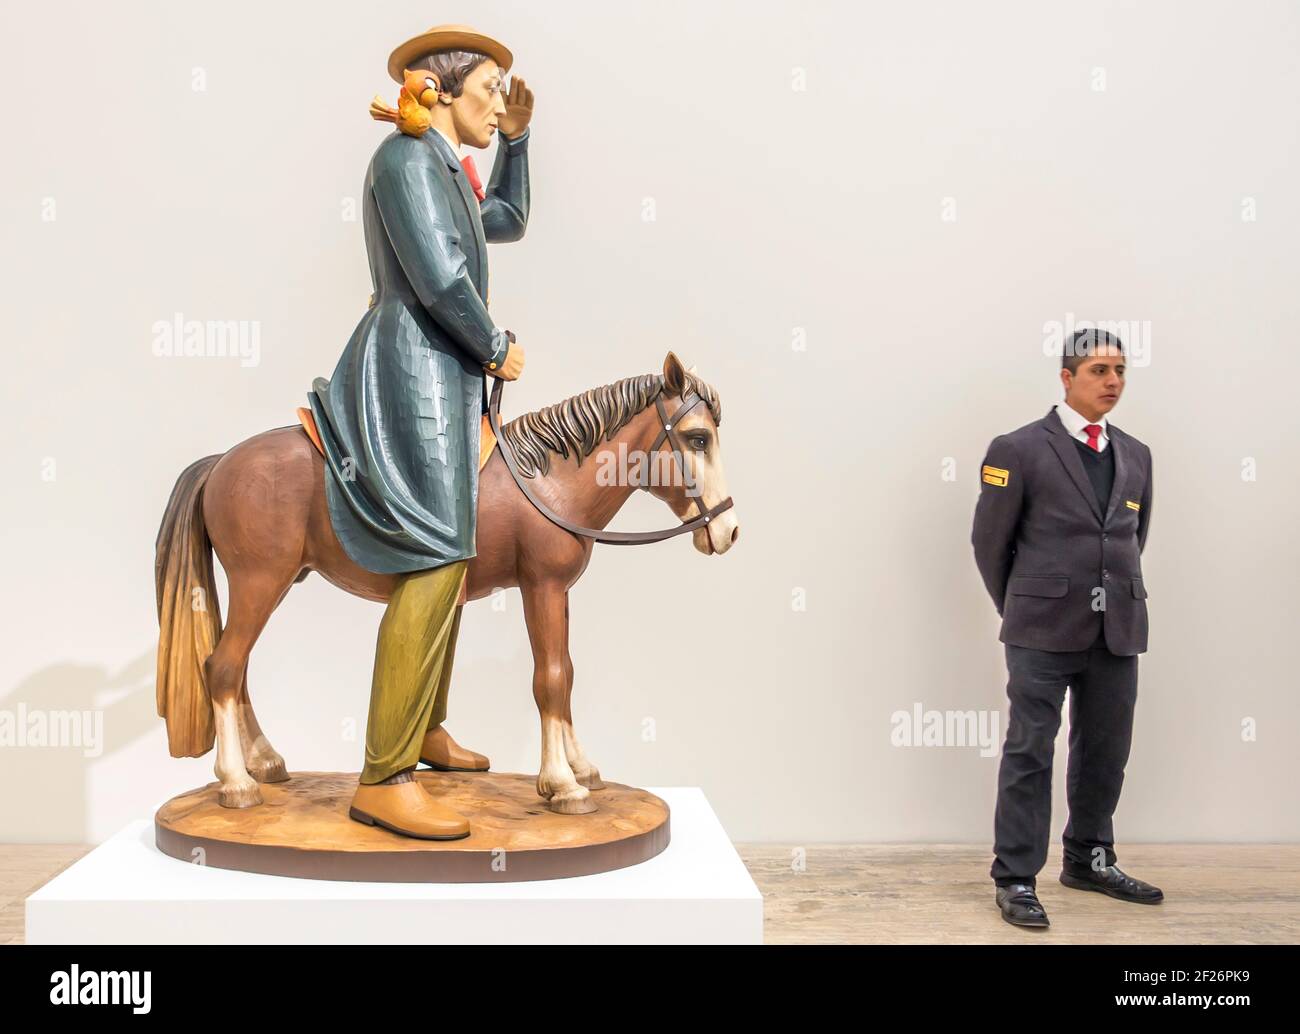 Buster Keaton sculpture by Jeff Koons exhibited in the Jumex Museum, Mexico City, Mexico Stock Photo